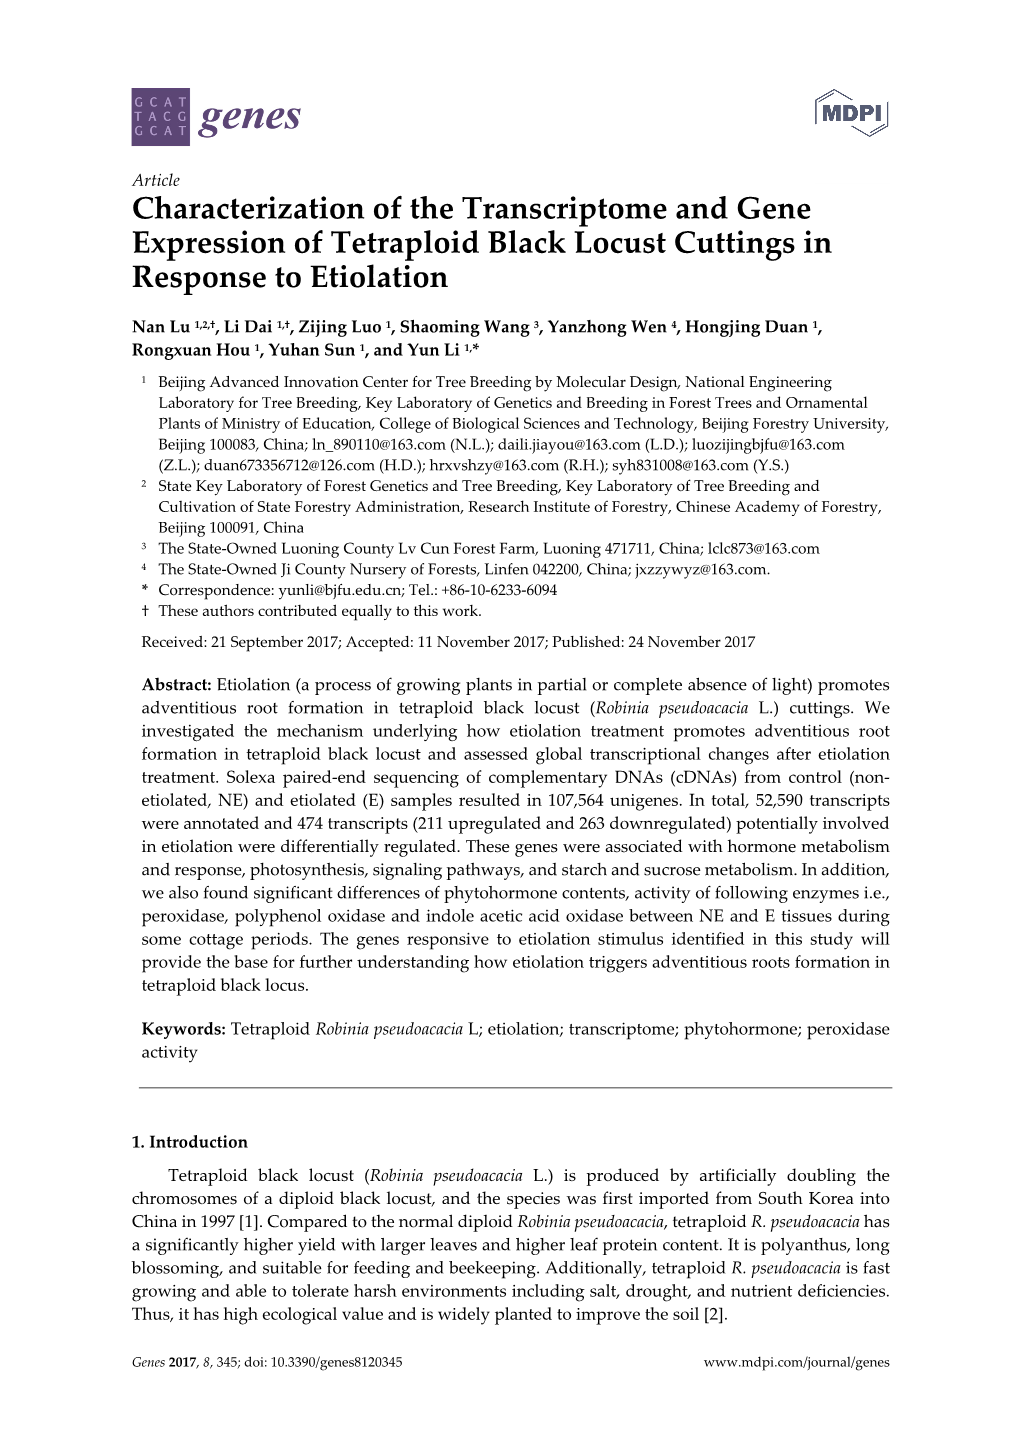 Characterization of the Transcriptome and Gene Expression of Tetraploid Black Locust Cuttings in Response to Etiolation